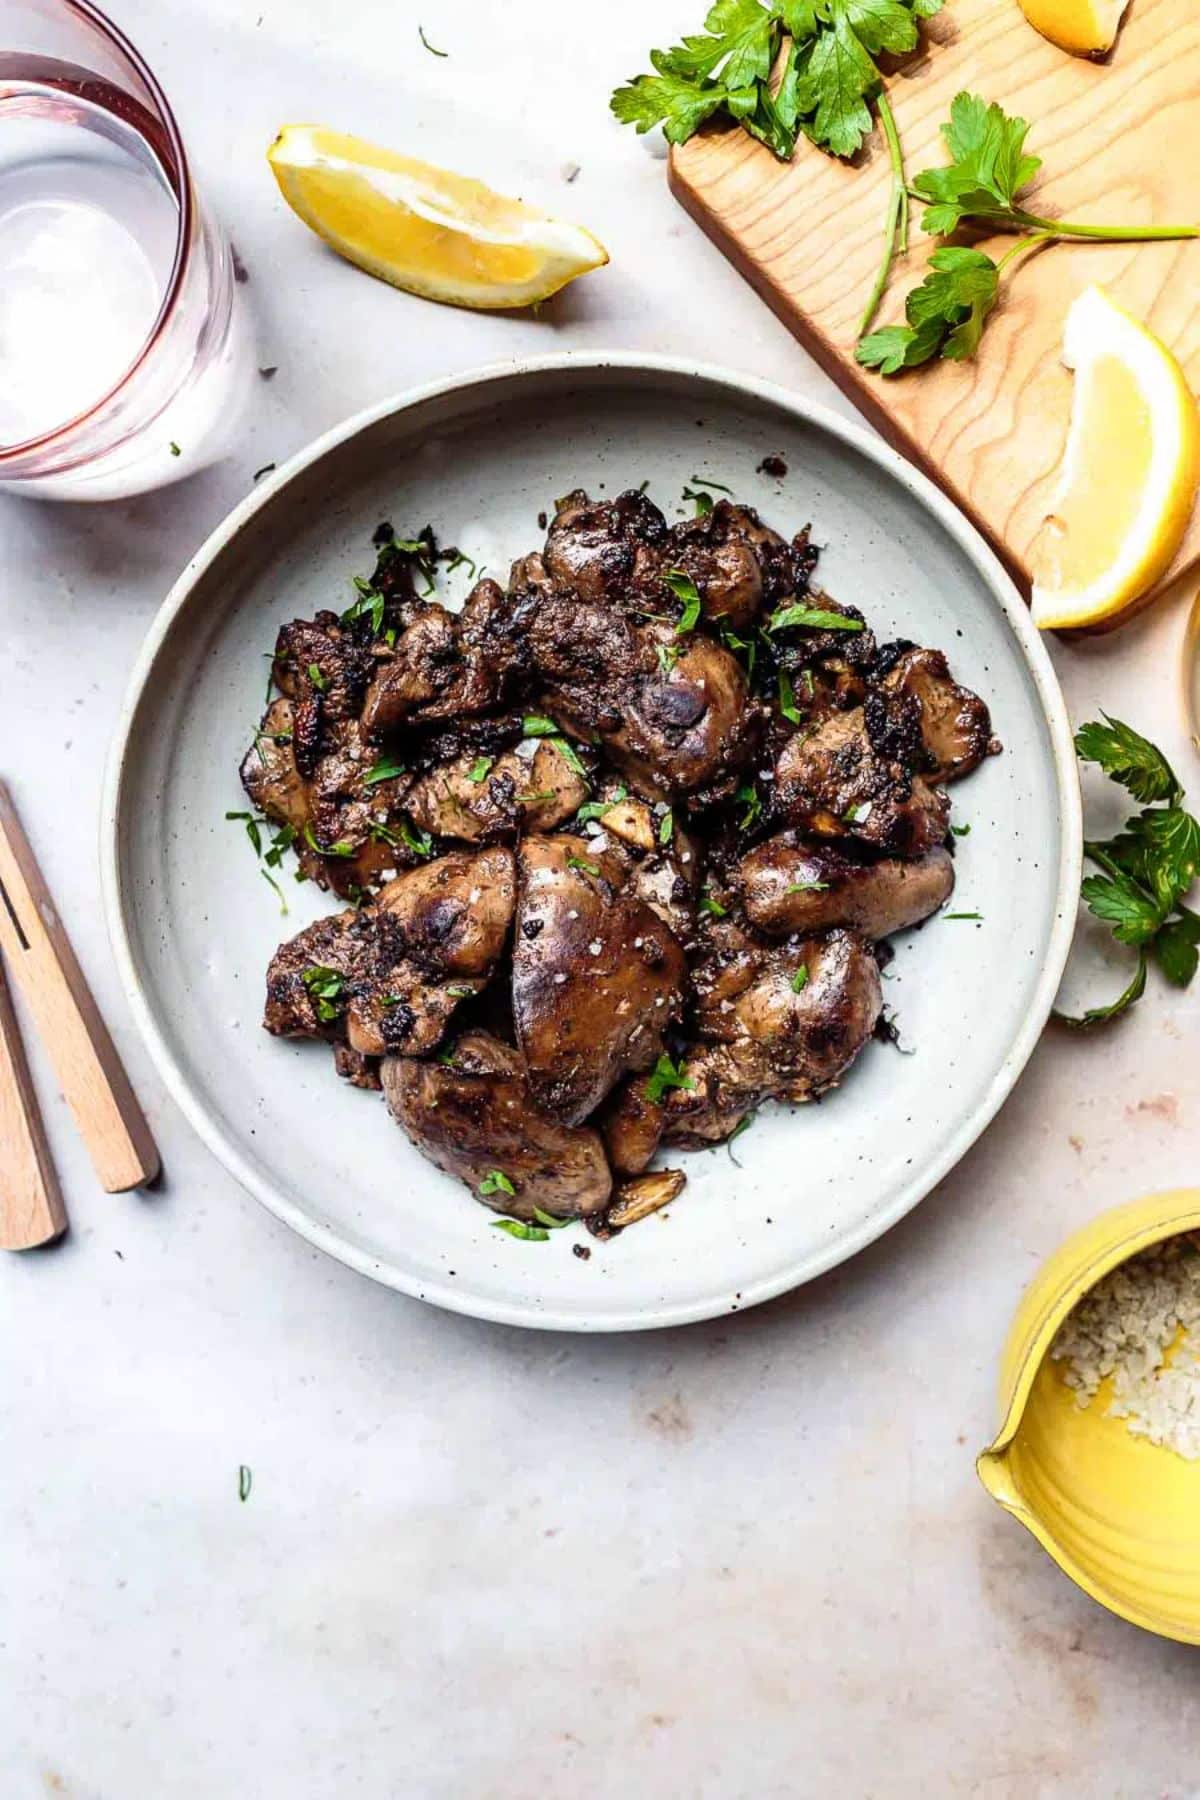 Juicy Sauteed Lemon-Garlic Chicken Liver and Onions on a white plate.